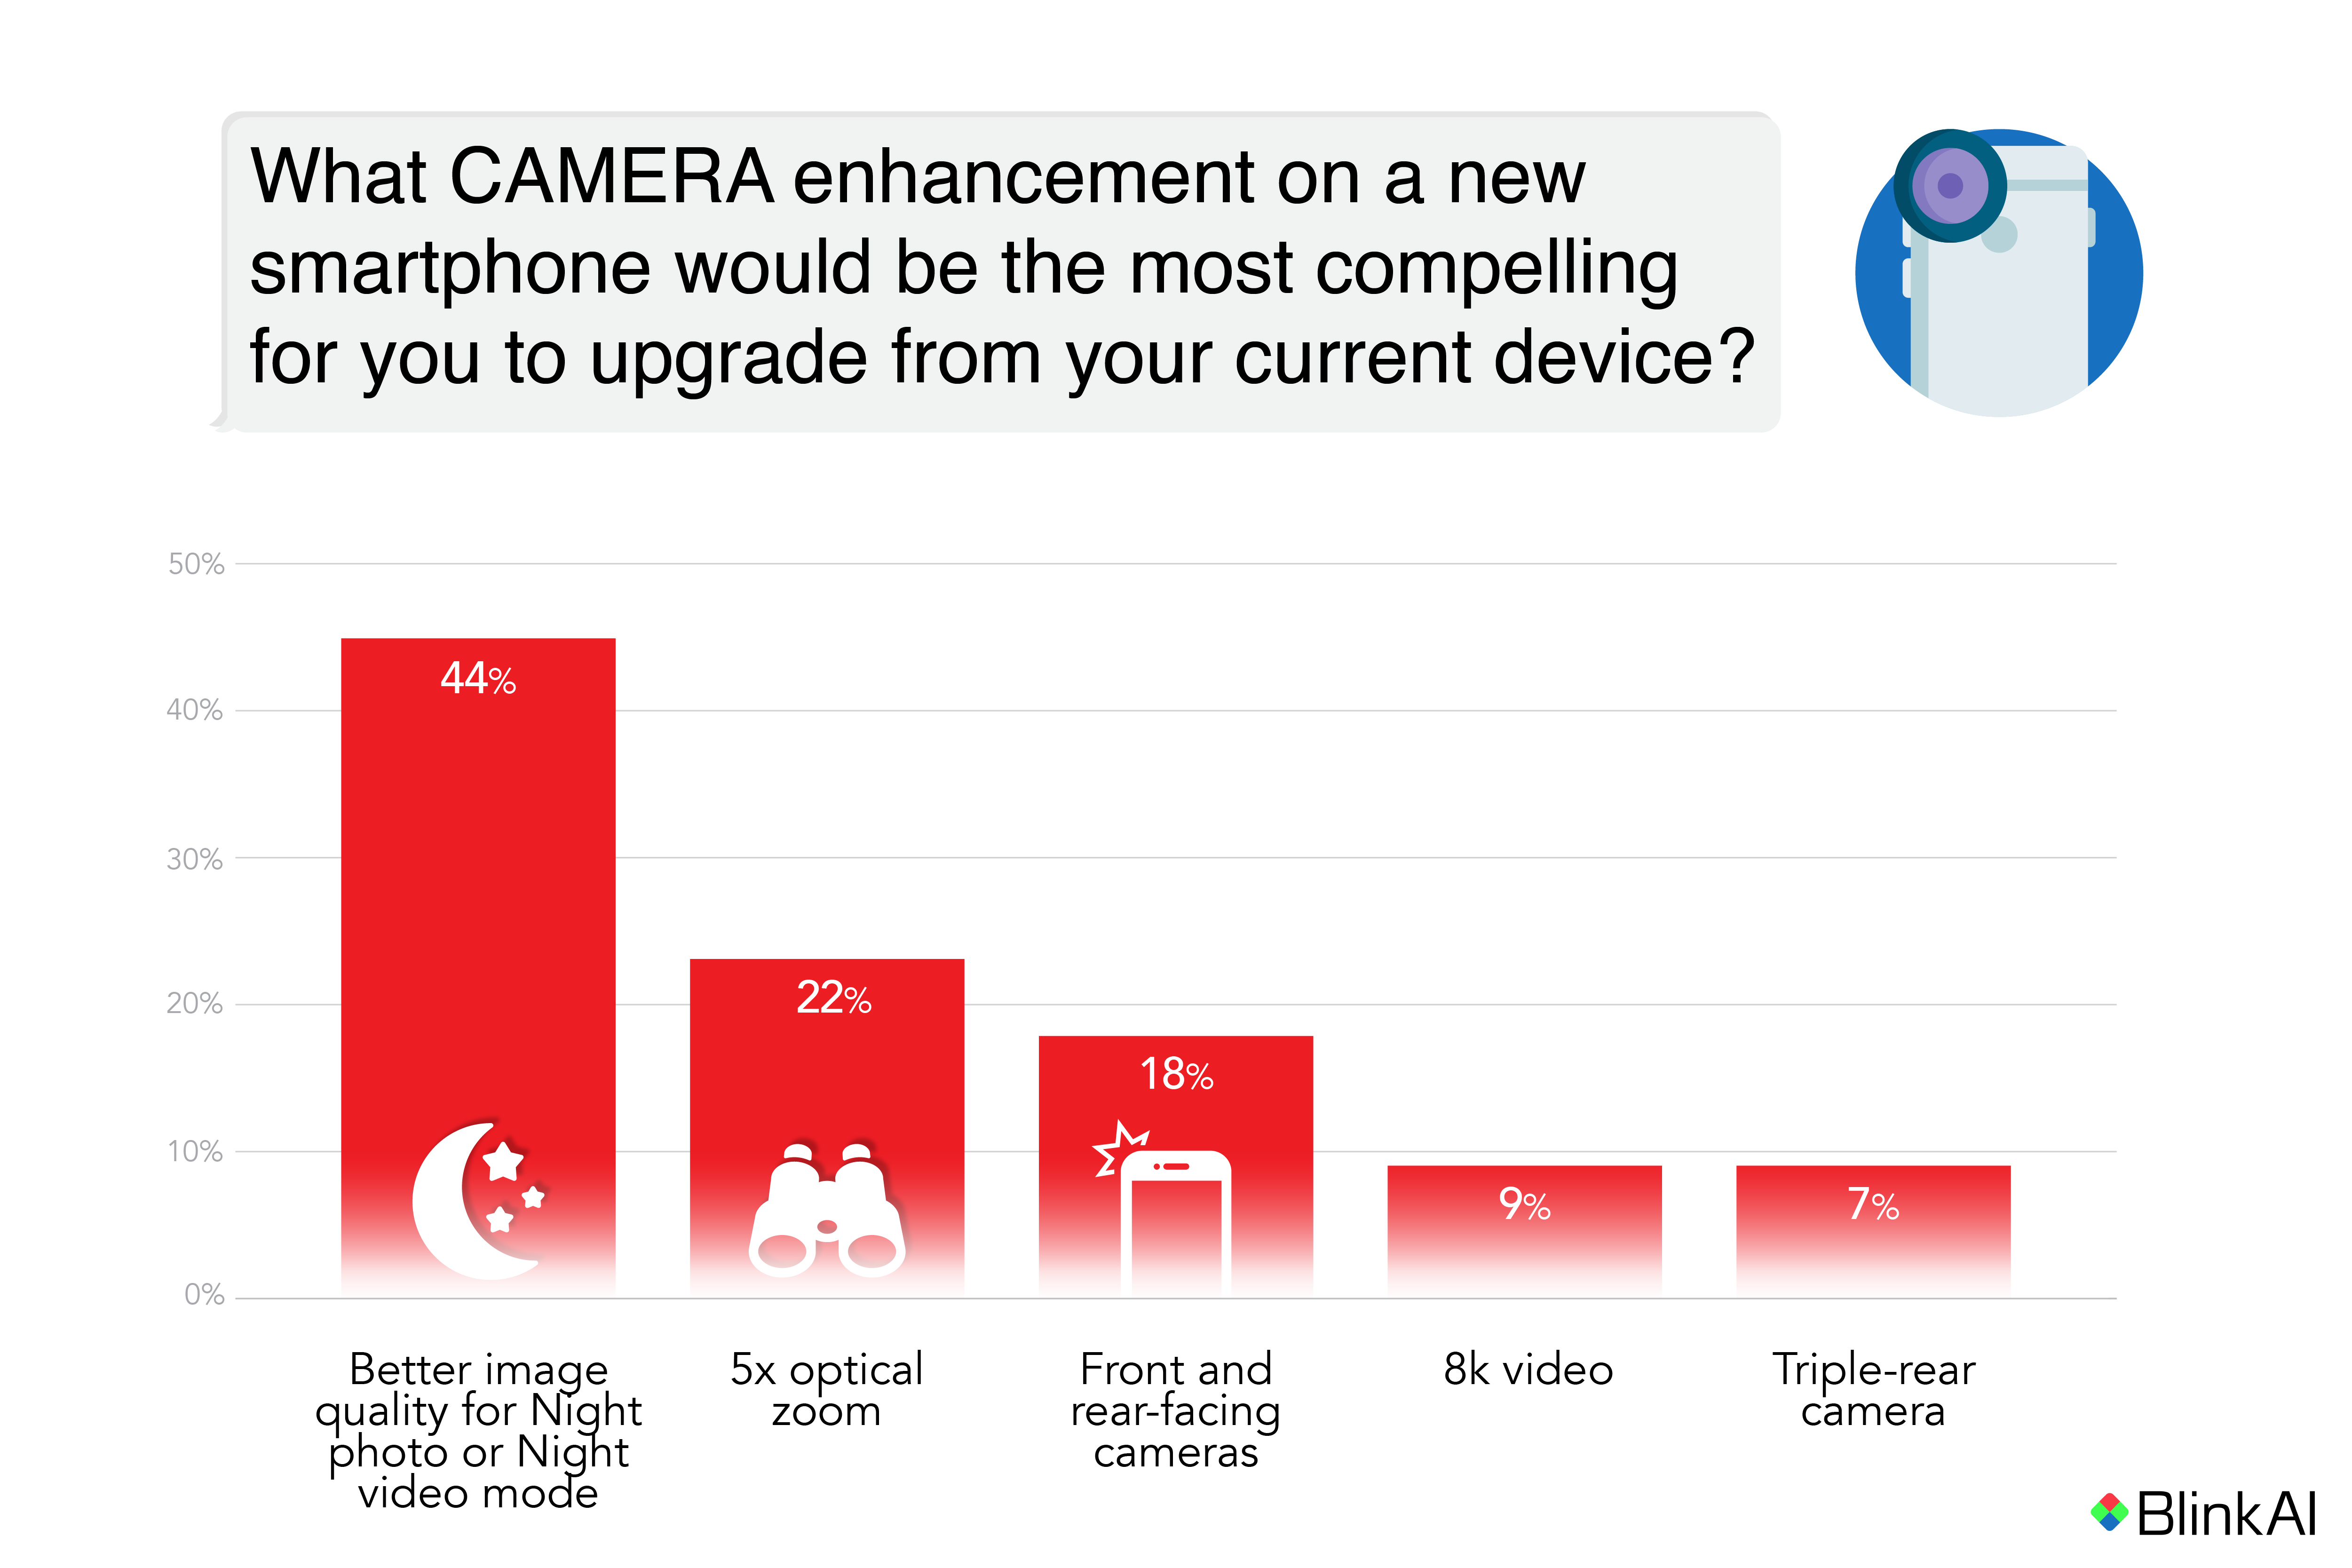 What Camera Enhancements Consumers Want on Their Next Device